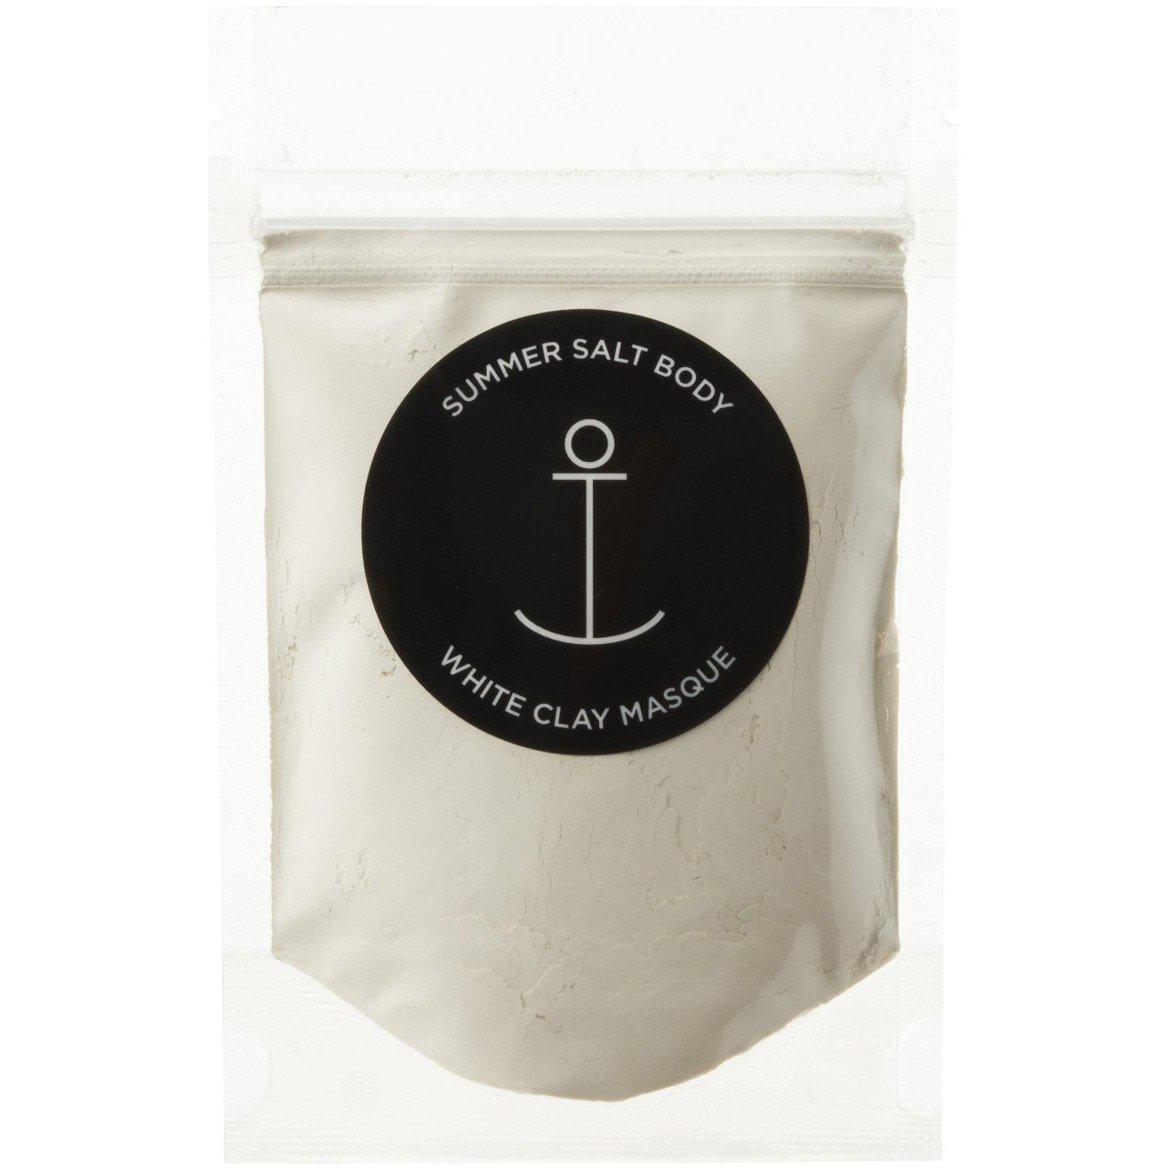 Mini Clay Mask - 40g-Beauty & Well-Being-Summer Salt Body-White Clay-The Bay Room